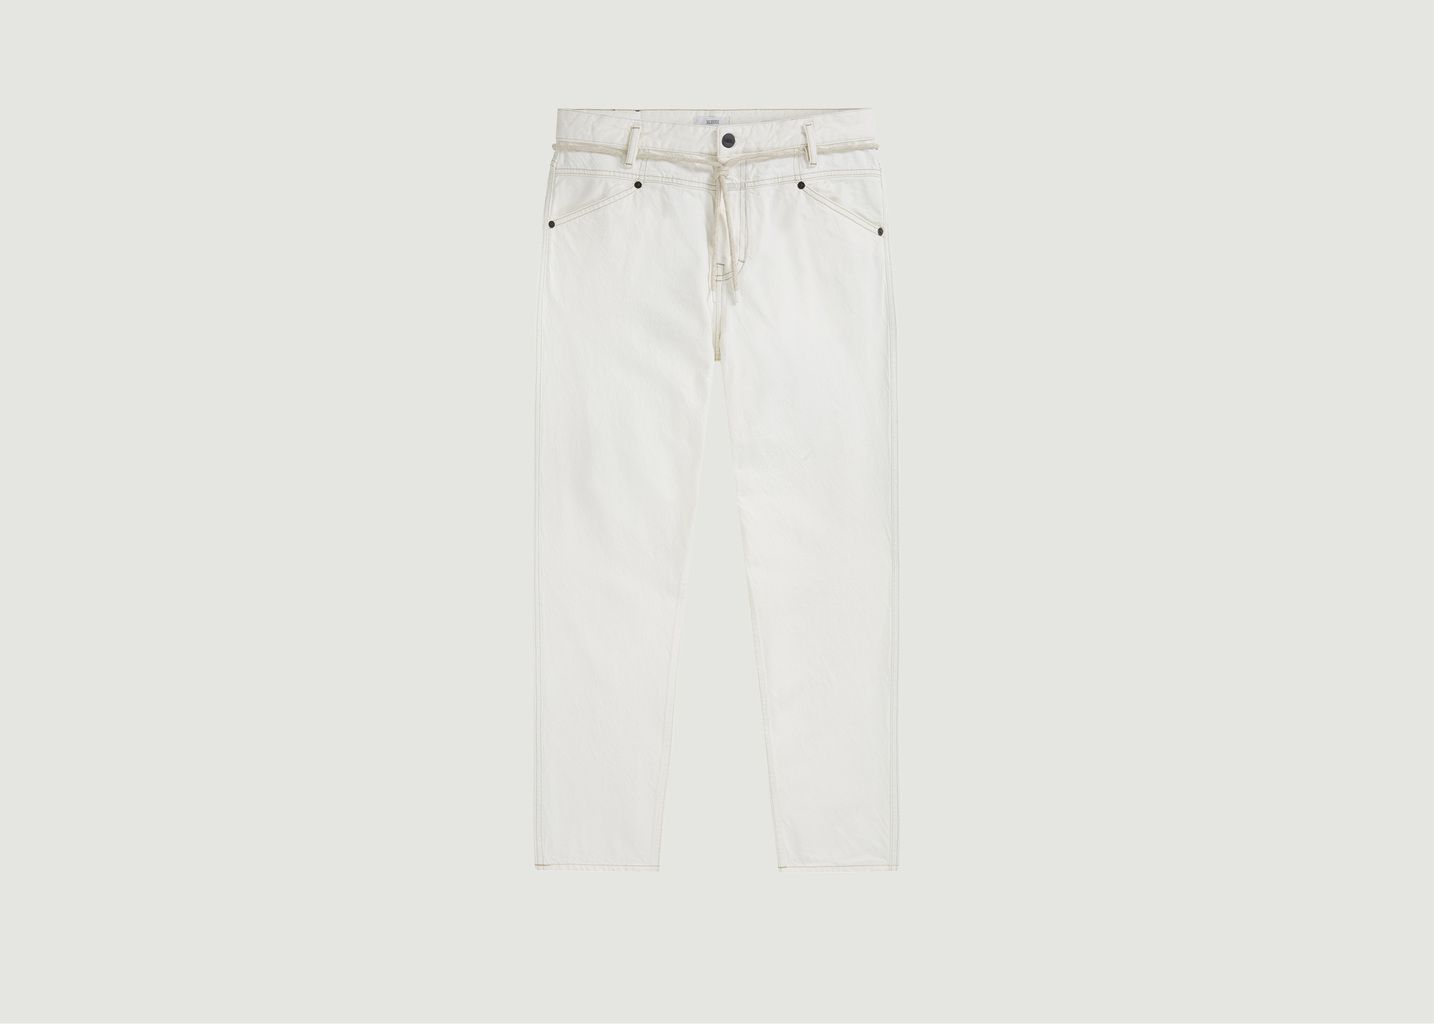 CLOSED X-Pocket Jeans In Organic Cotton